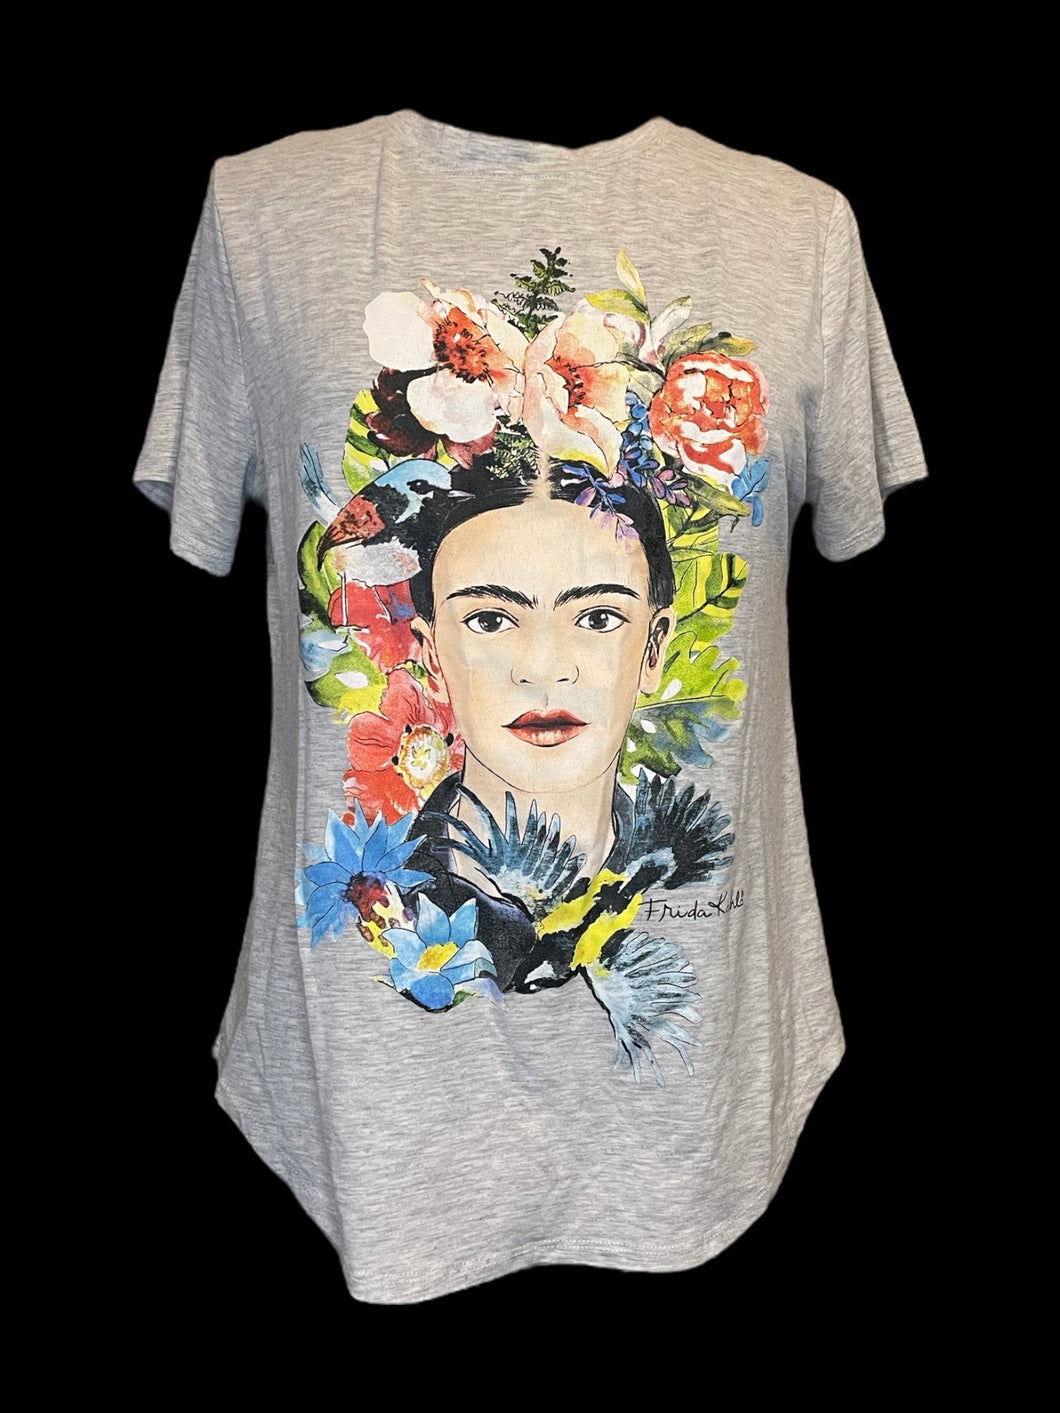 L Heathered grey short sleeve top w/ floral Frida Kahlo graphic